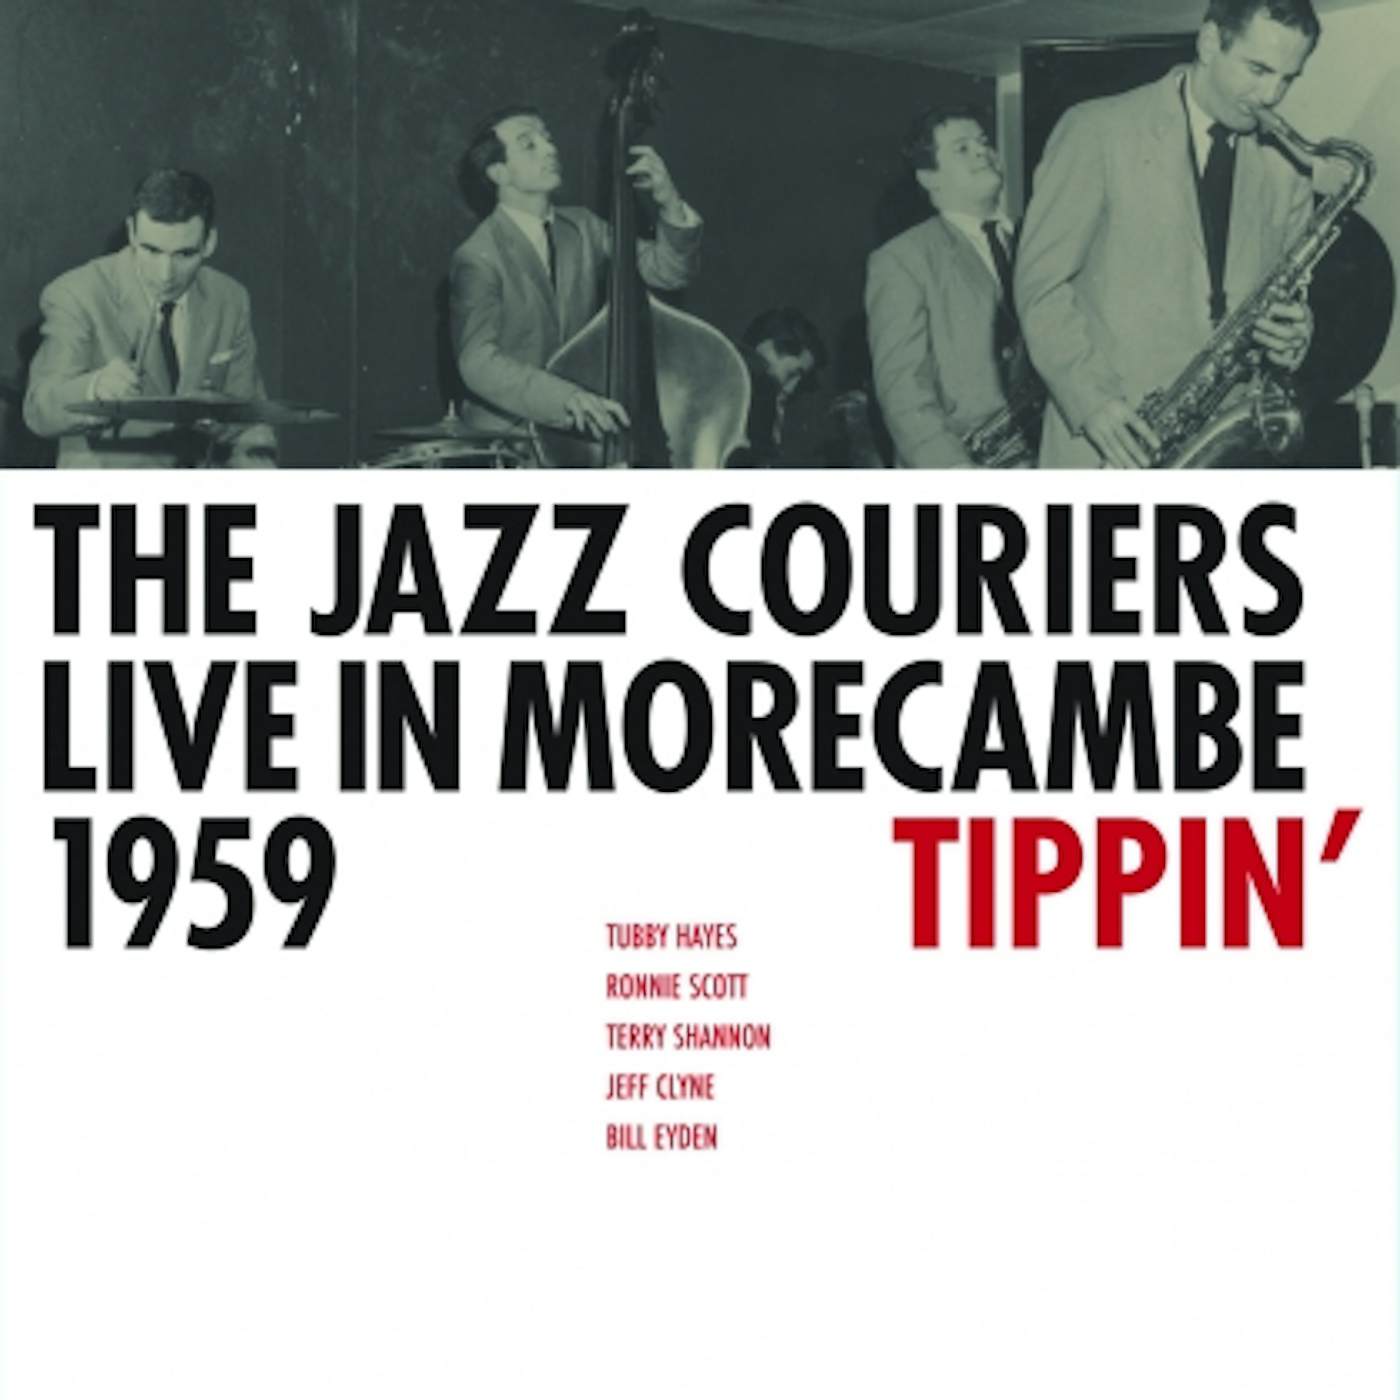 Jazz Couriers TIPPIN' LIVE IN MORECAMBE 1959 Vinyl Record - Holland Release